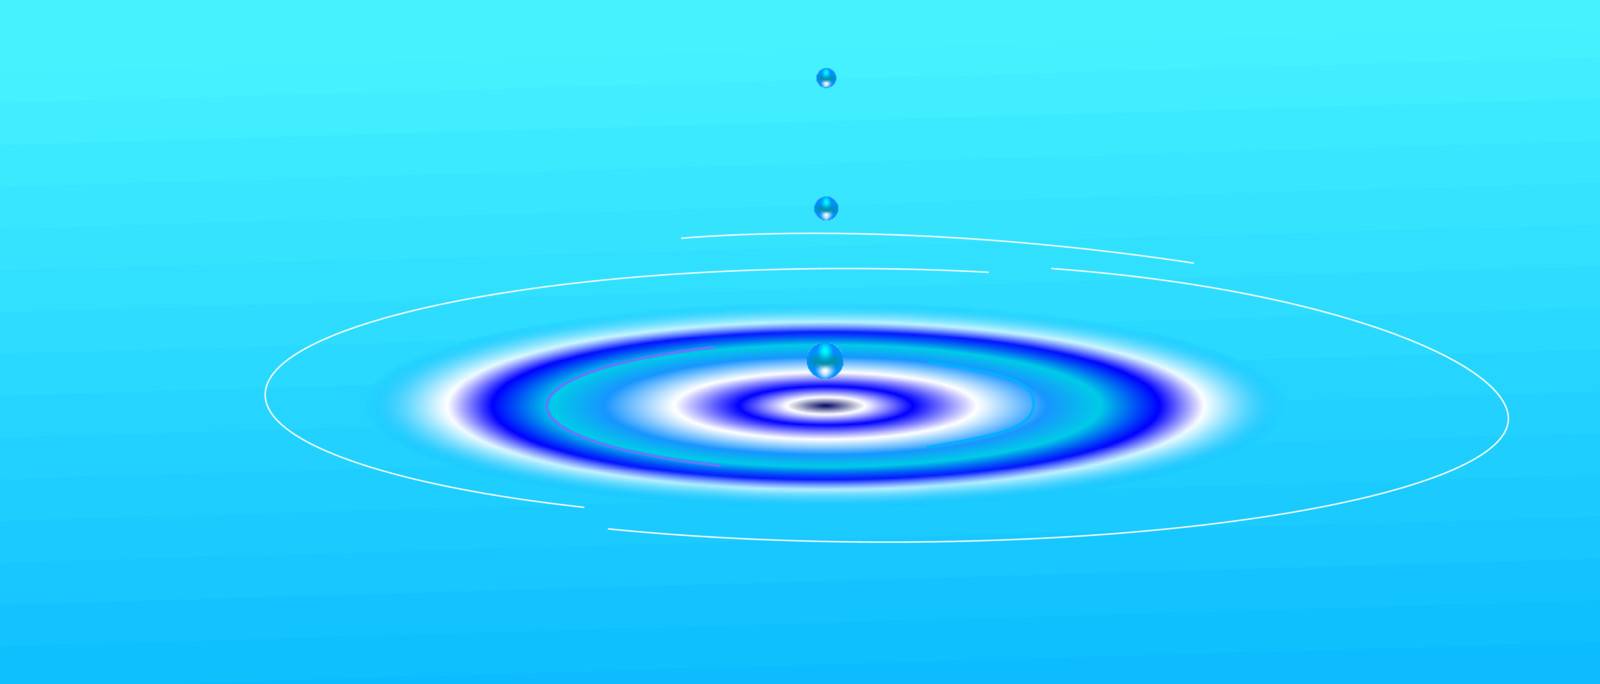 This vector image of three falling drops of water causing ripples in a pond were created entirely in Adobe Illustrator.